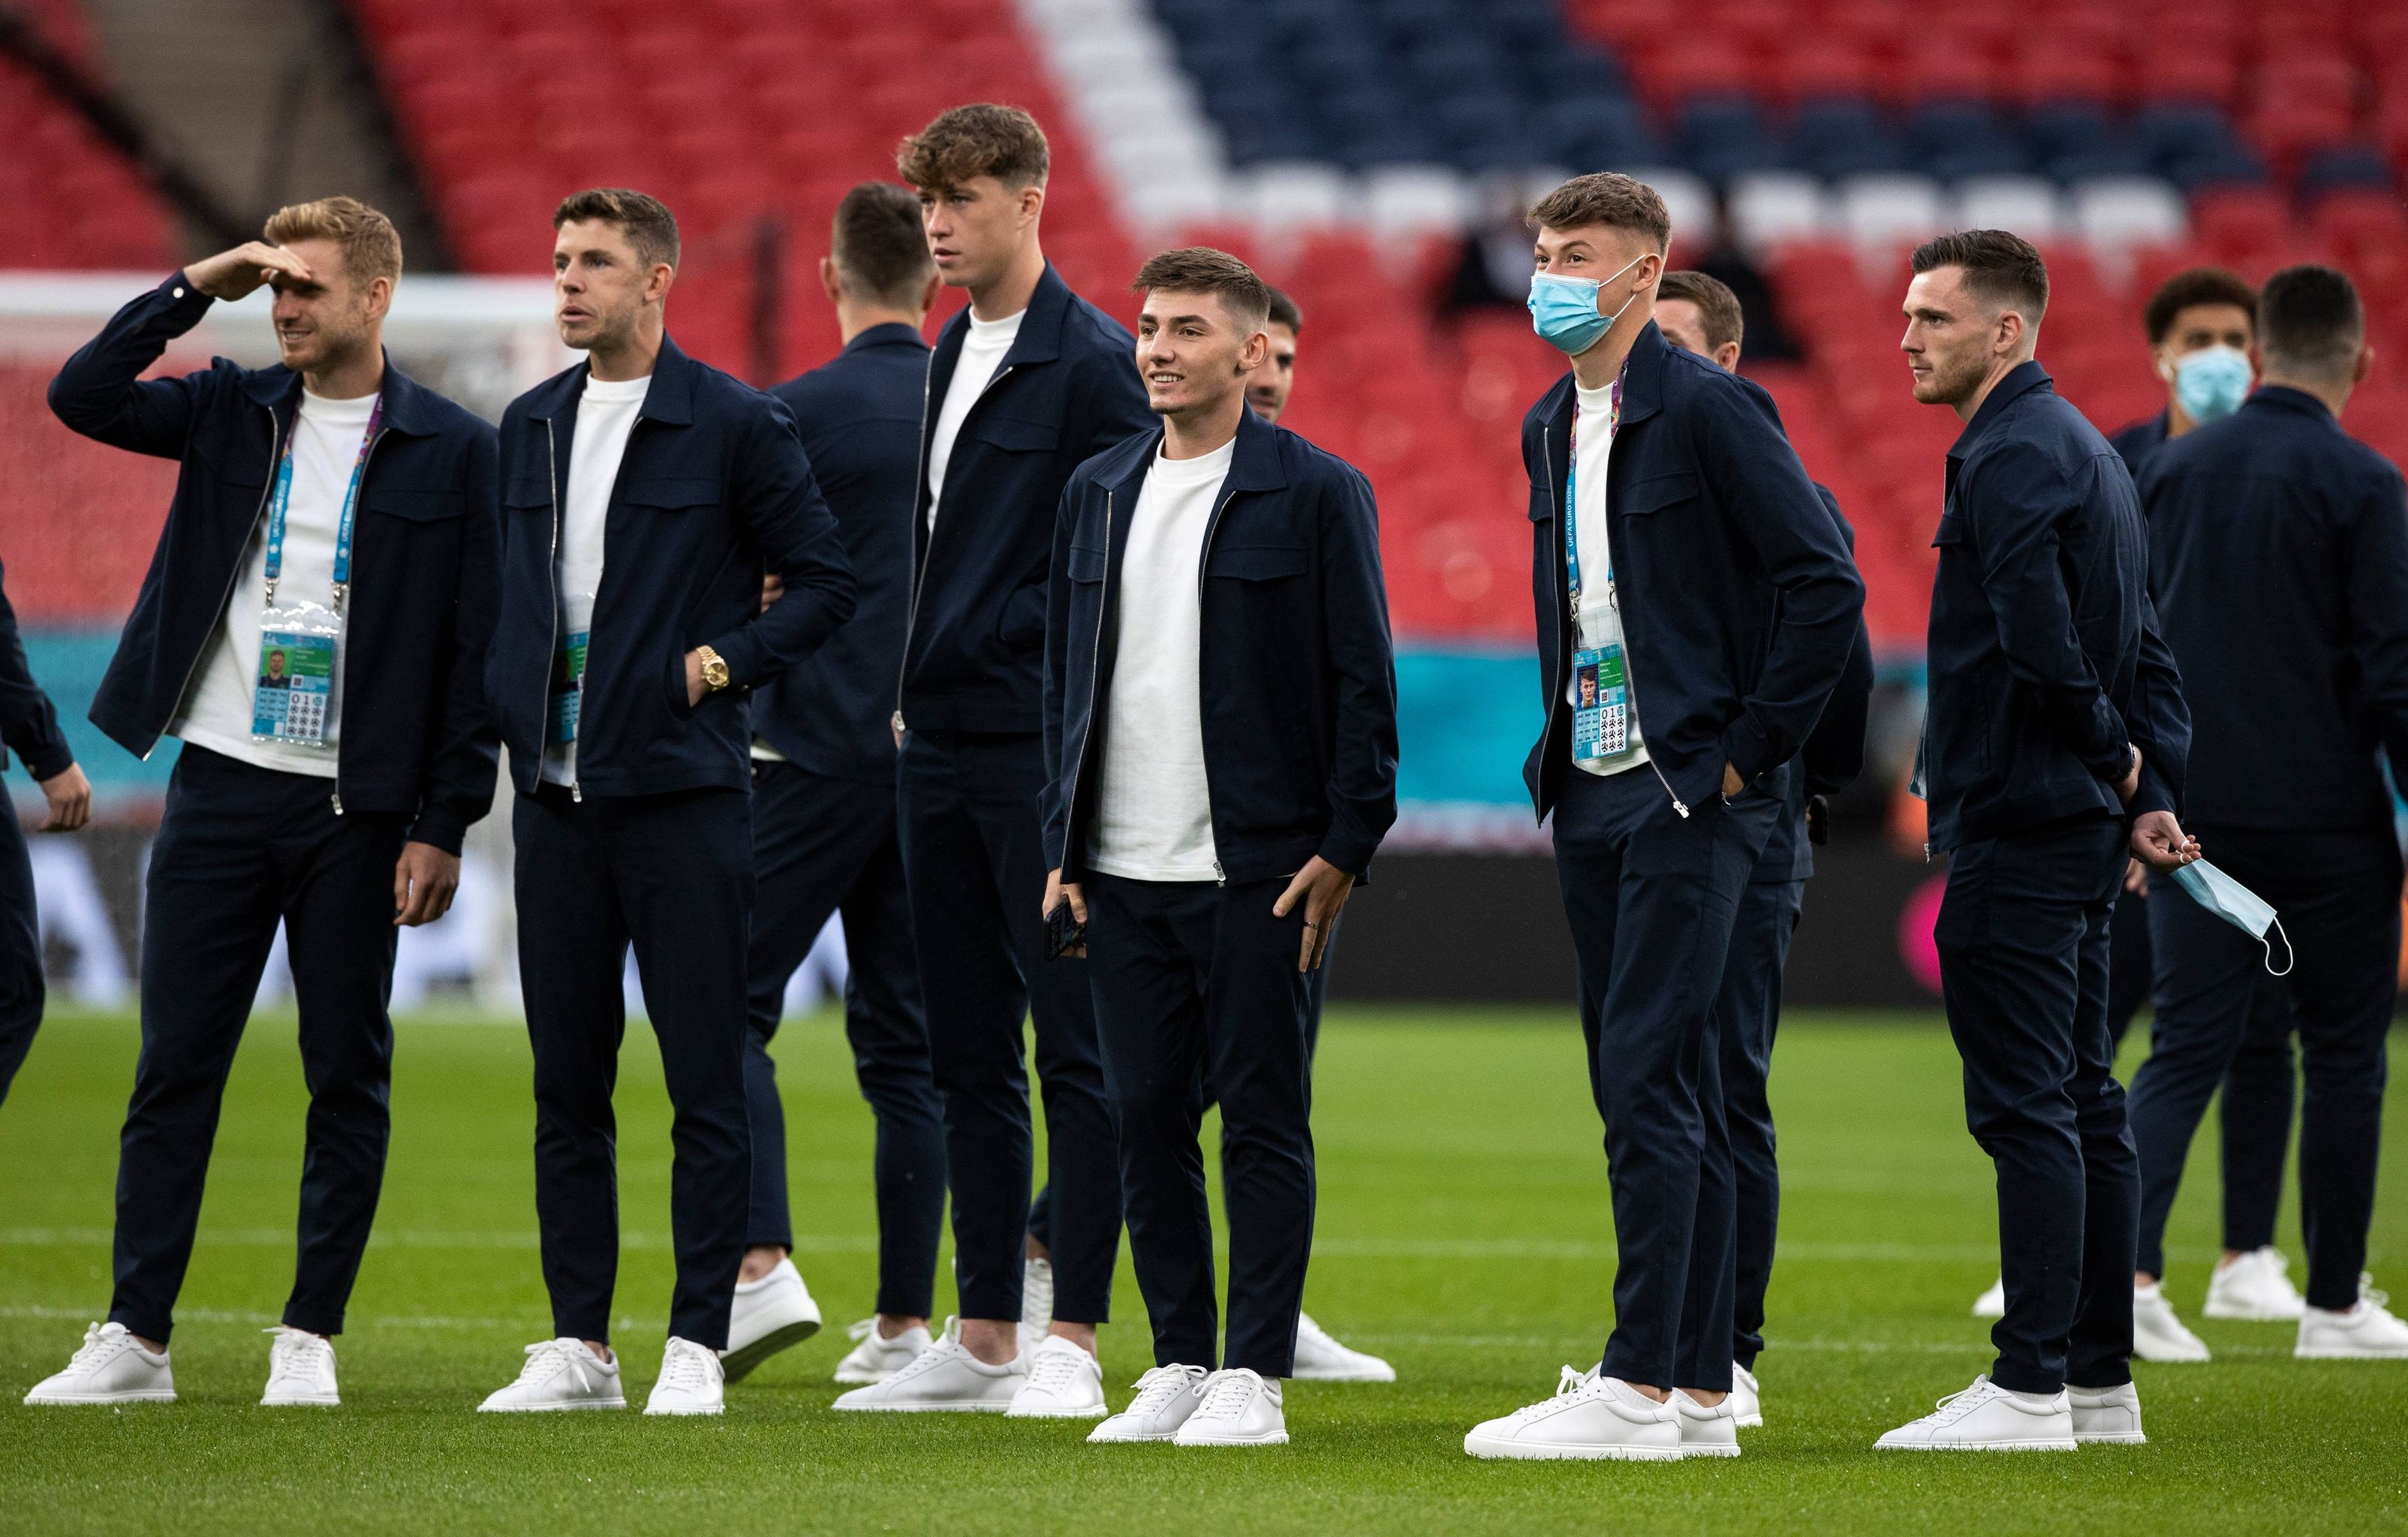 Scotland team out on Wembley pitch. (SNS Group/ Craig Williamson)